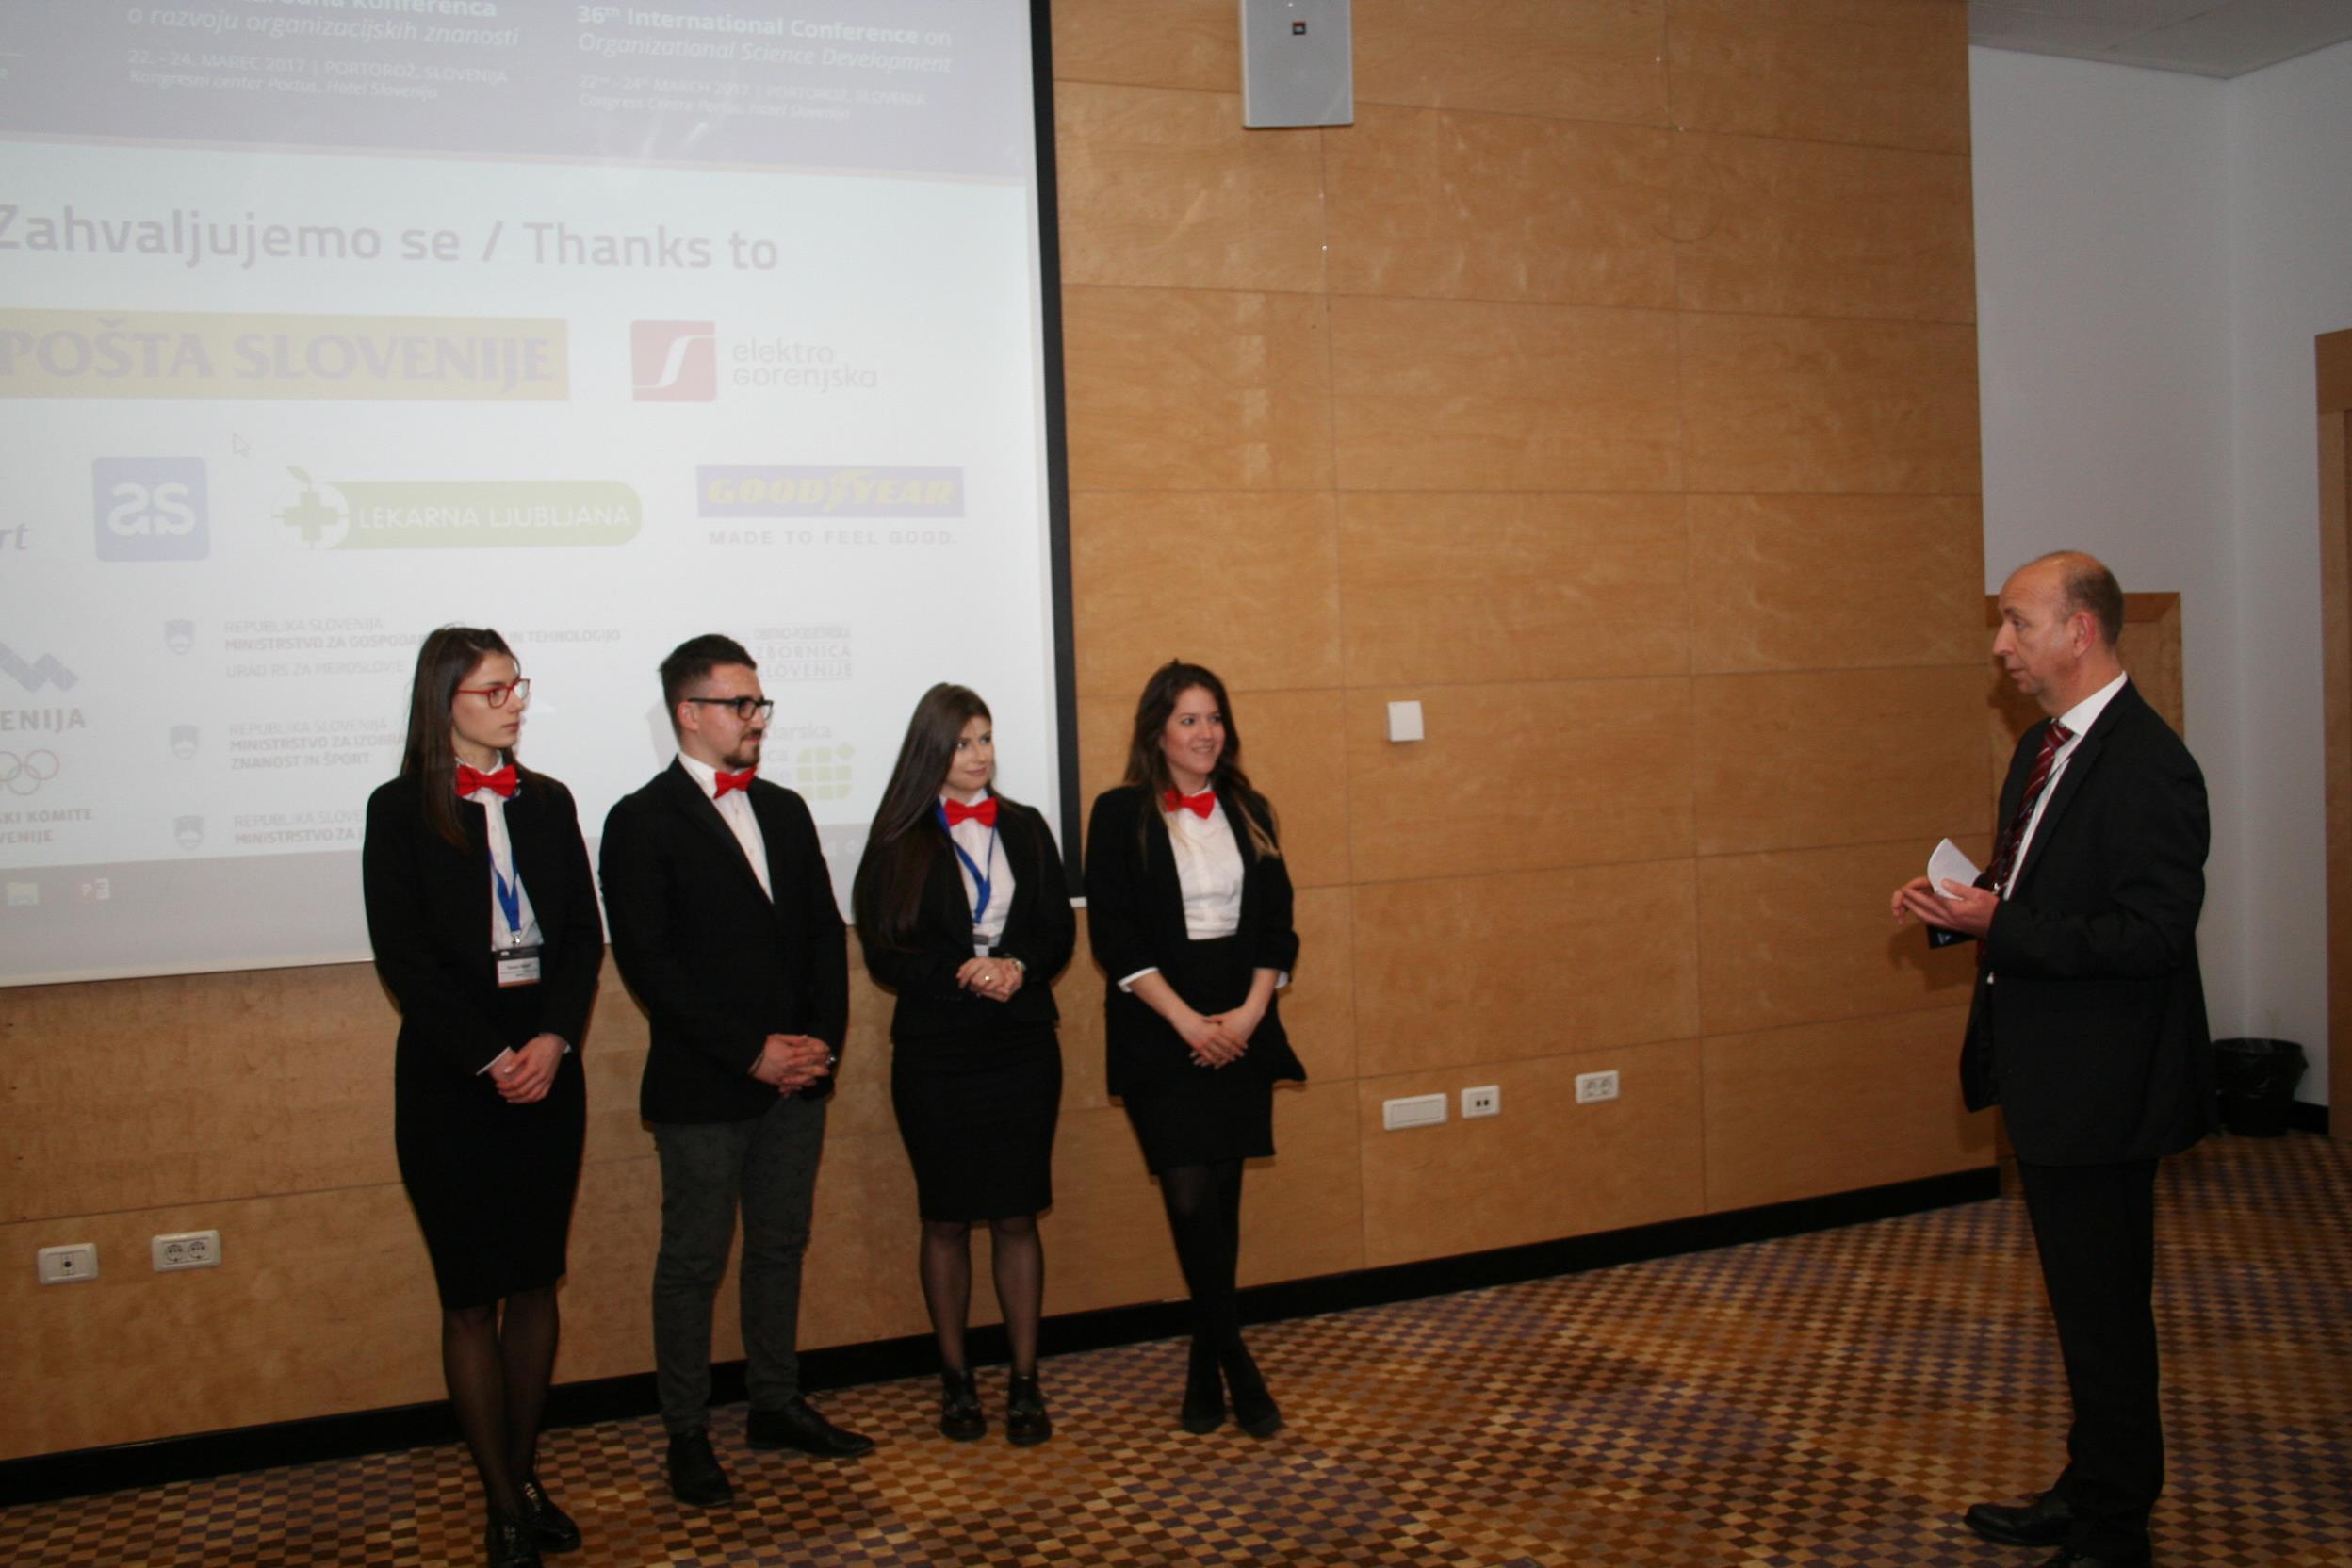 Case study competition